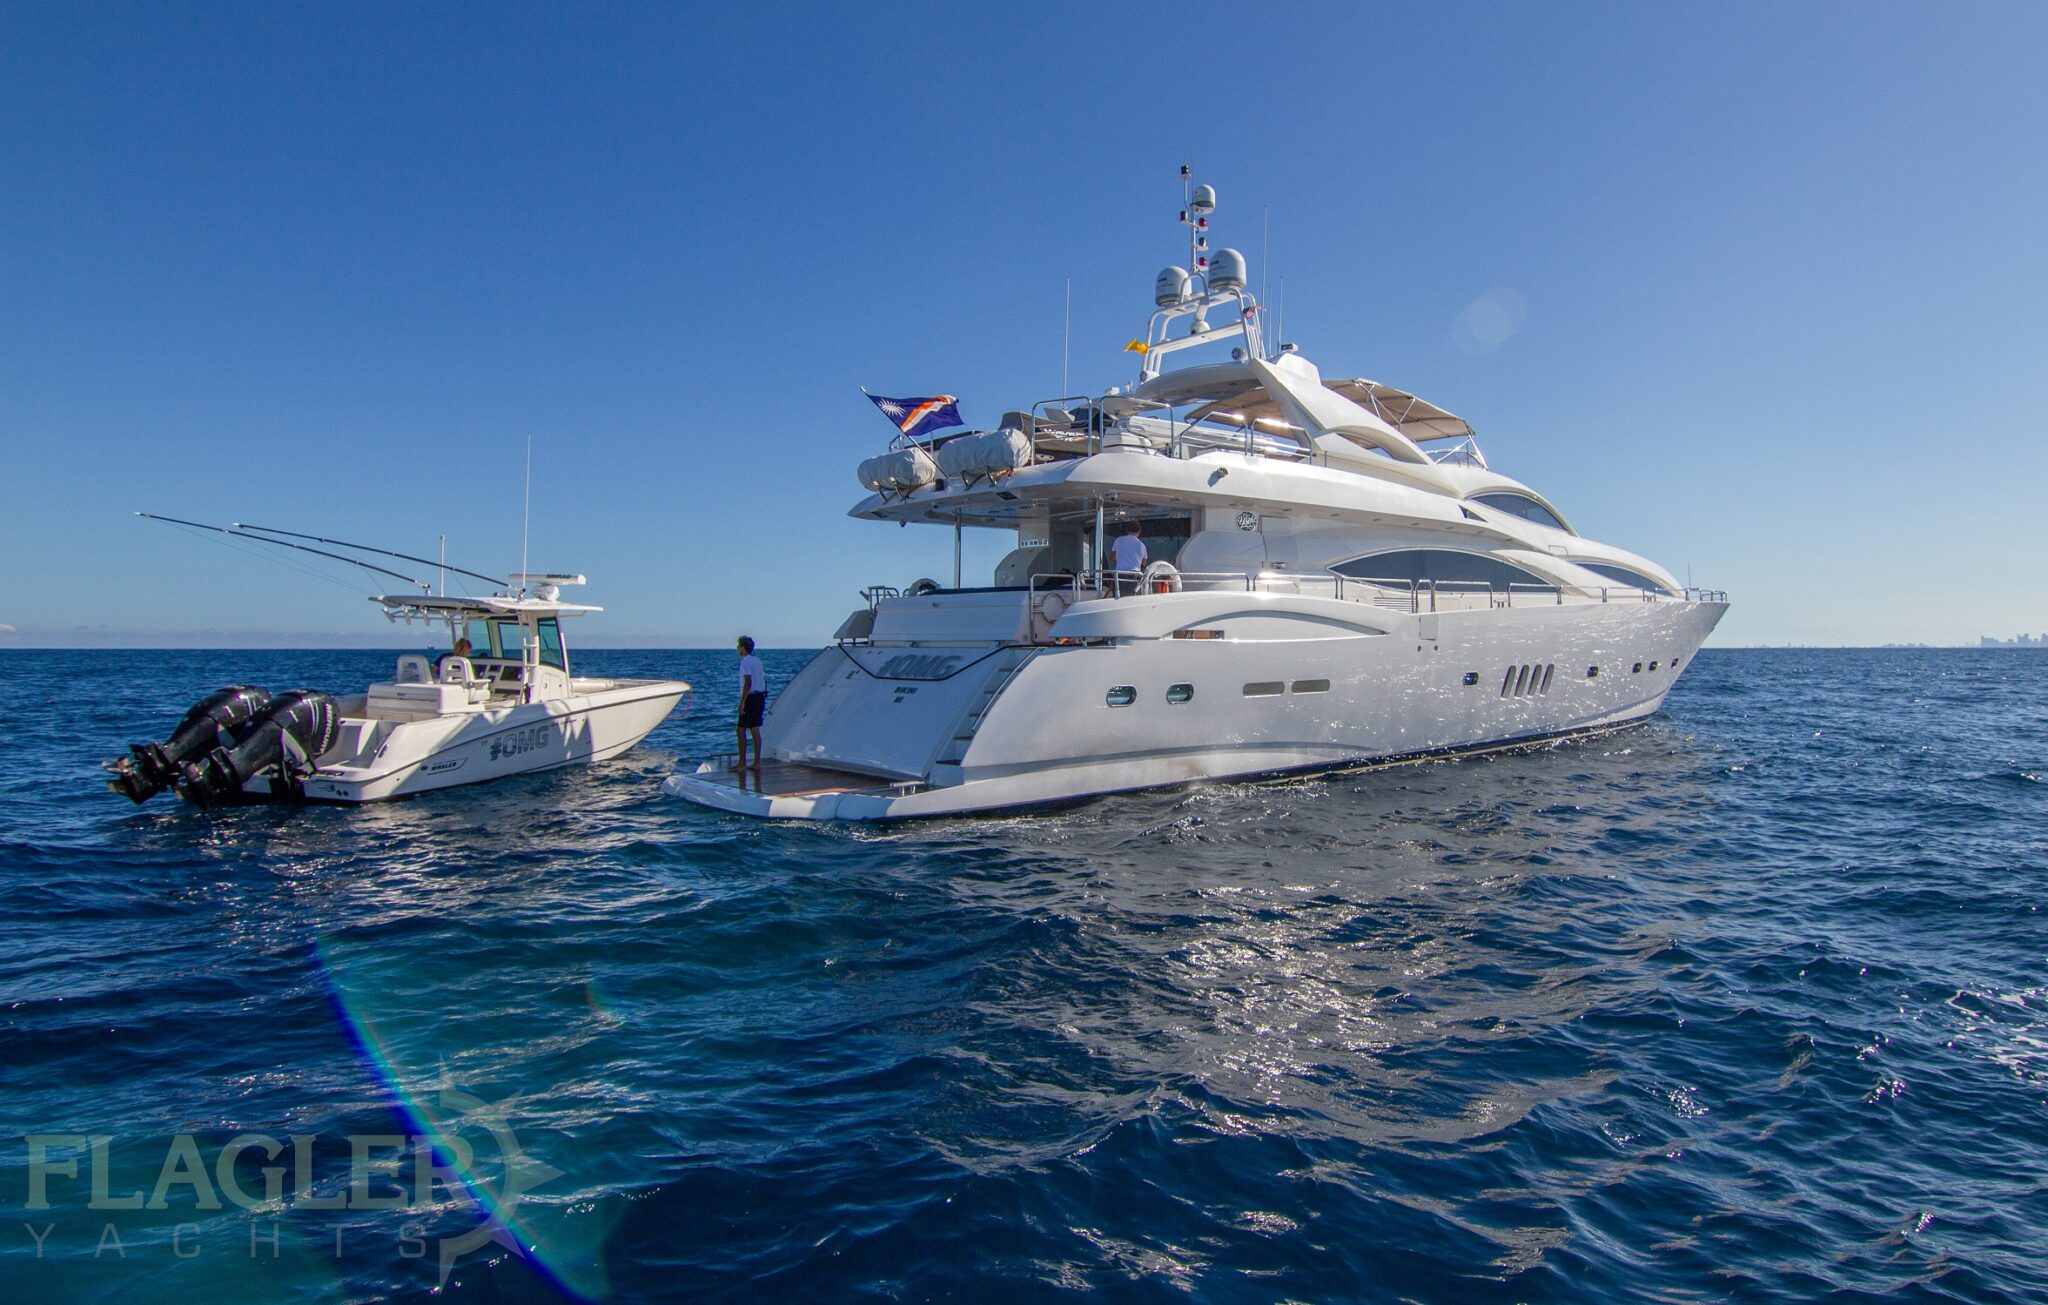 sunseeker 105 yacht for sale flagler yachts used yacht